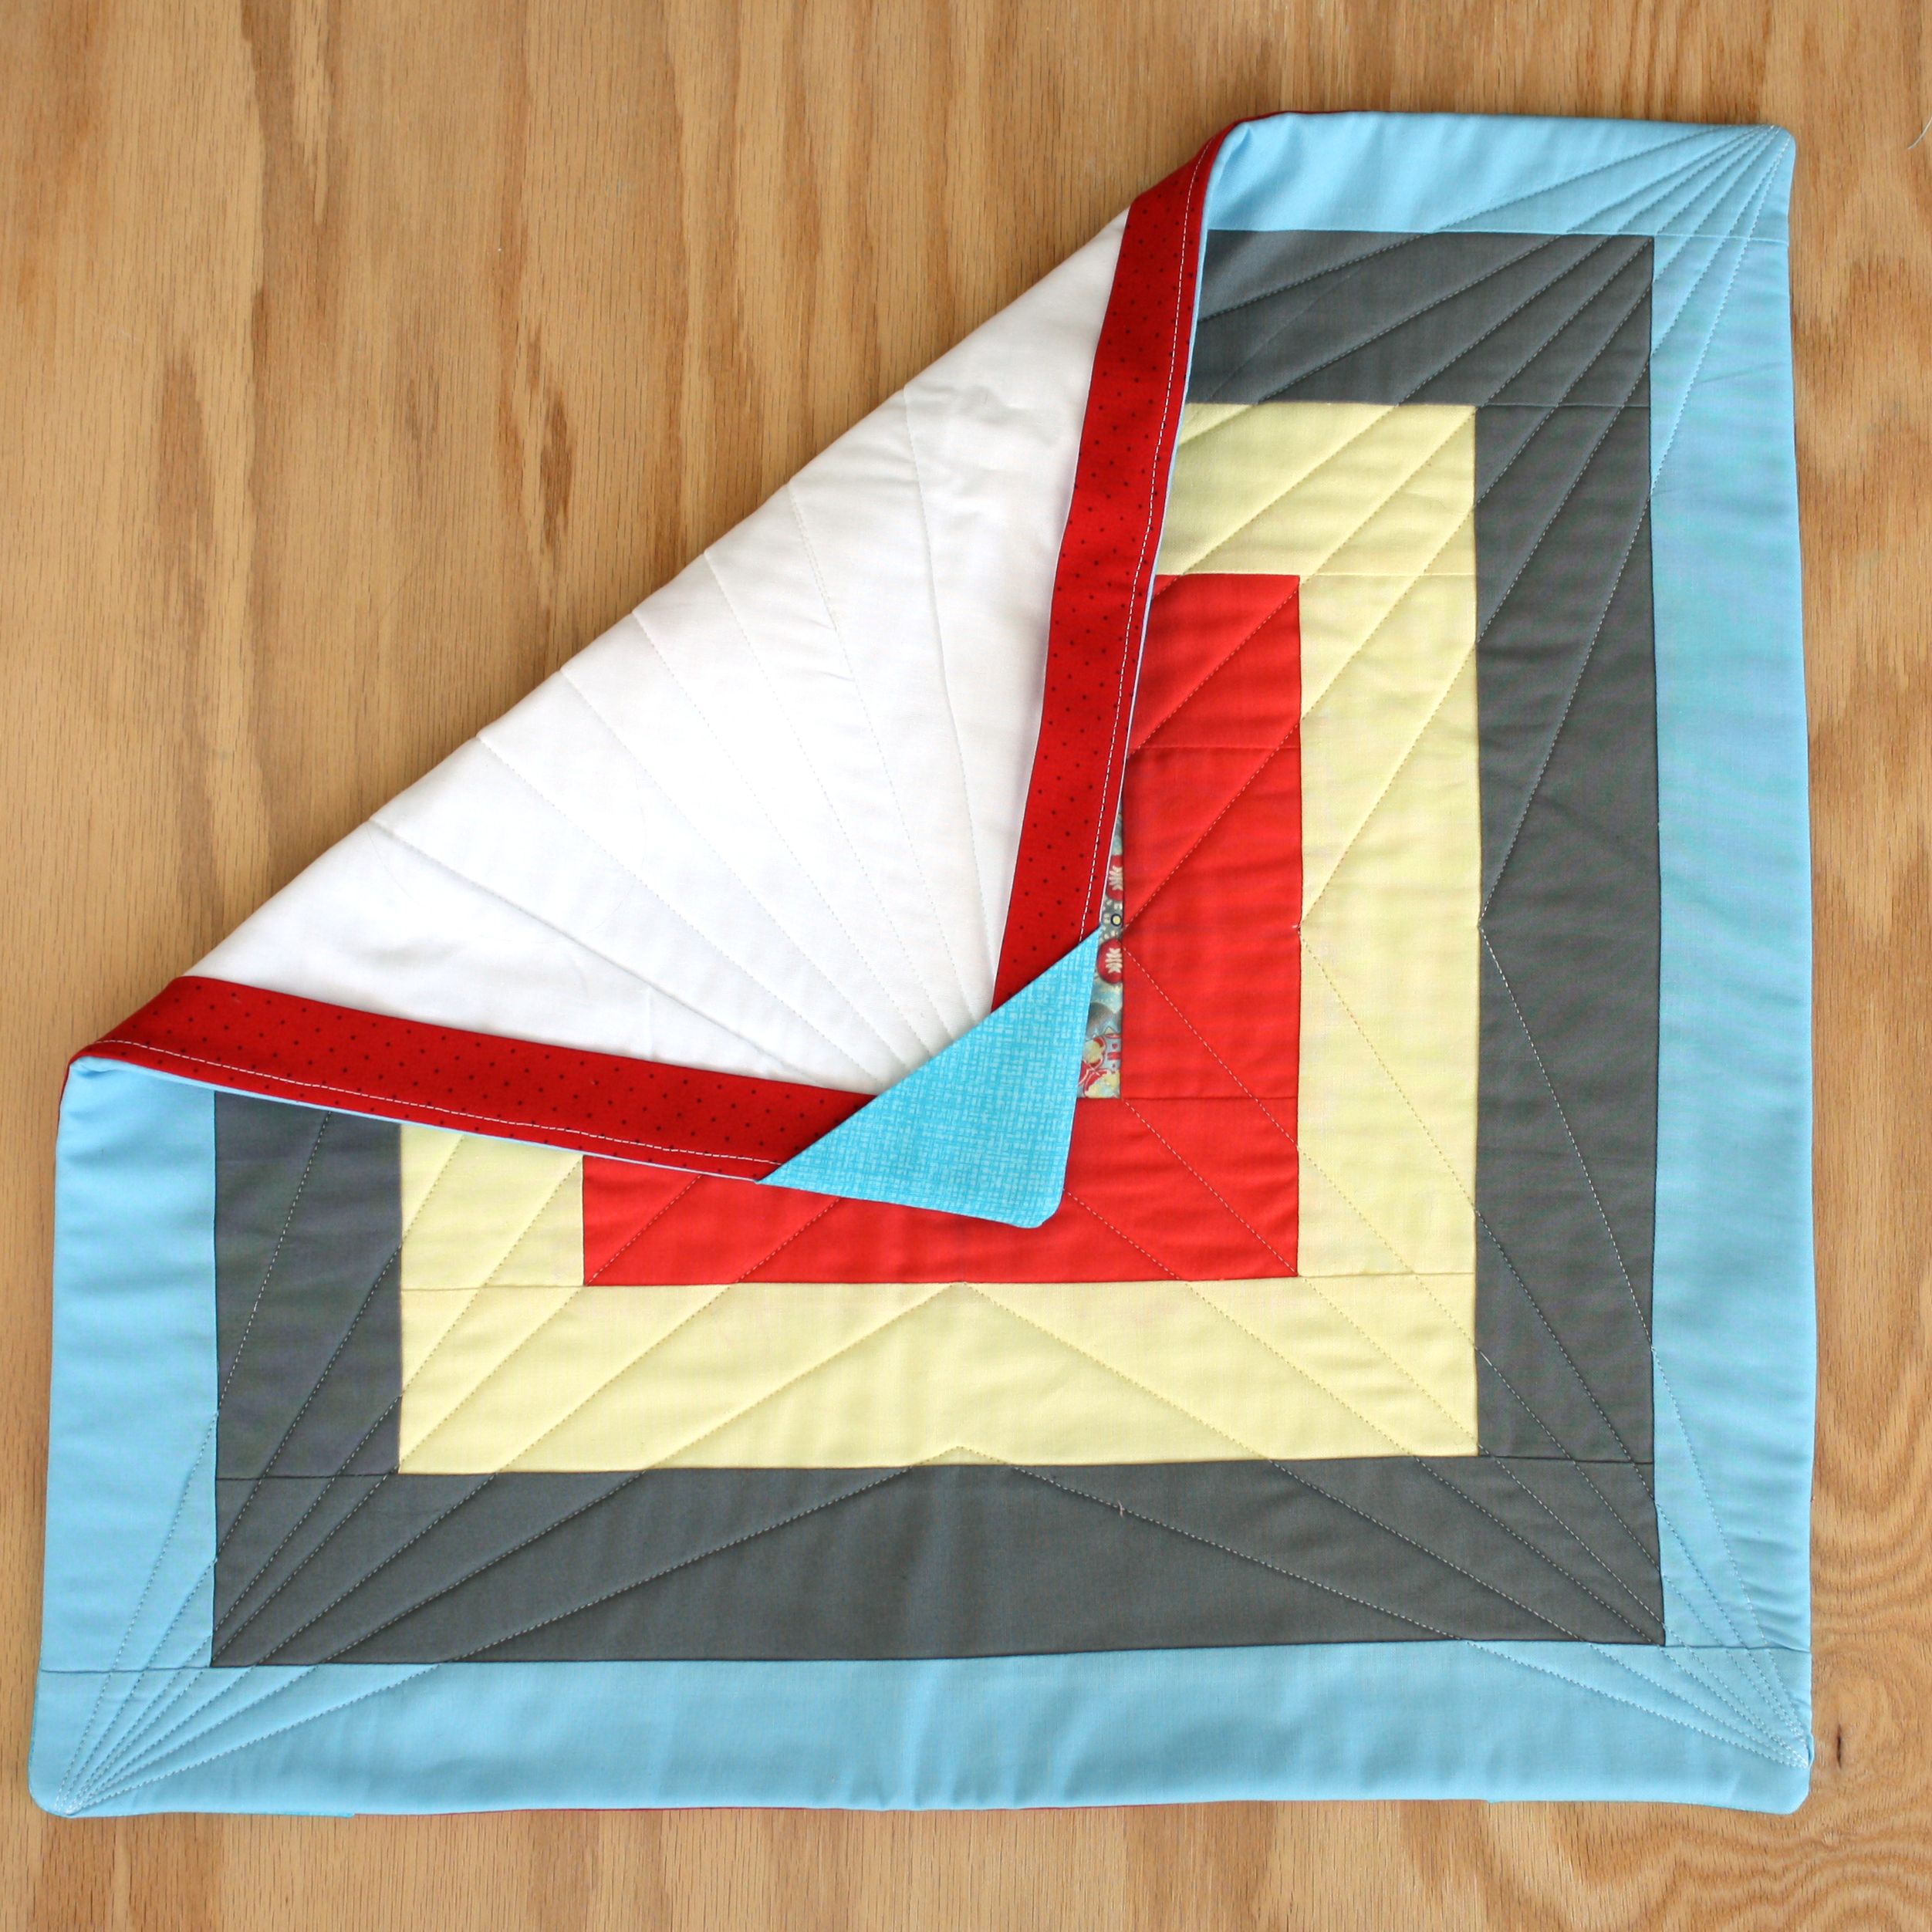 Preparing The Quilt For Facing